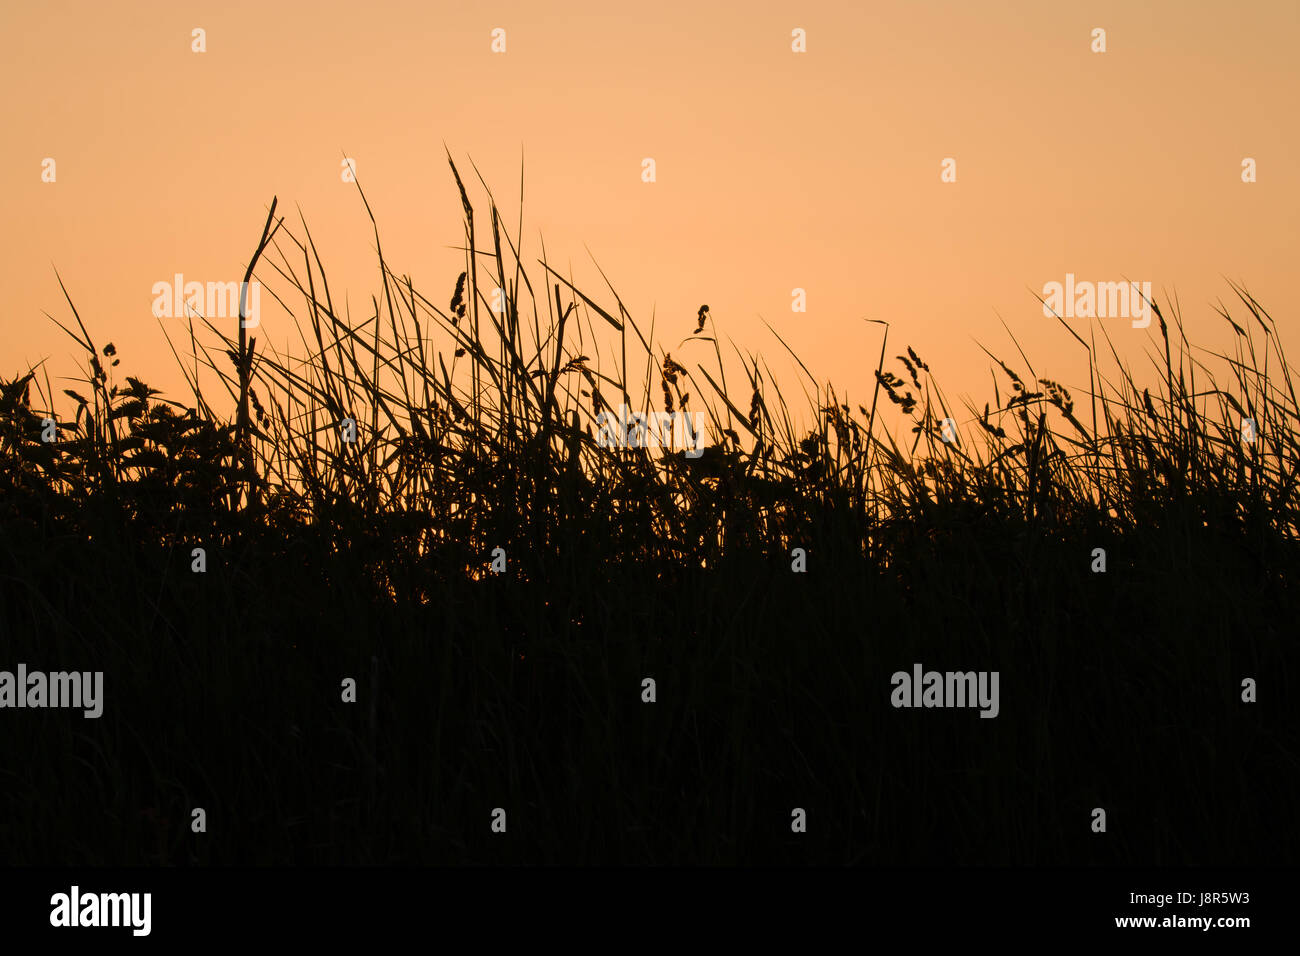 Grasses and wild flowers silhouetted against orange sky at dawn Stock Photo